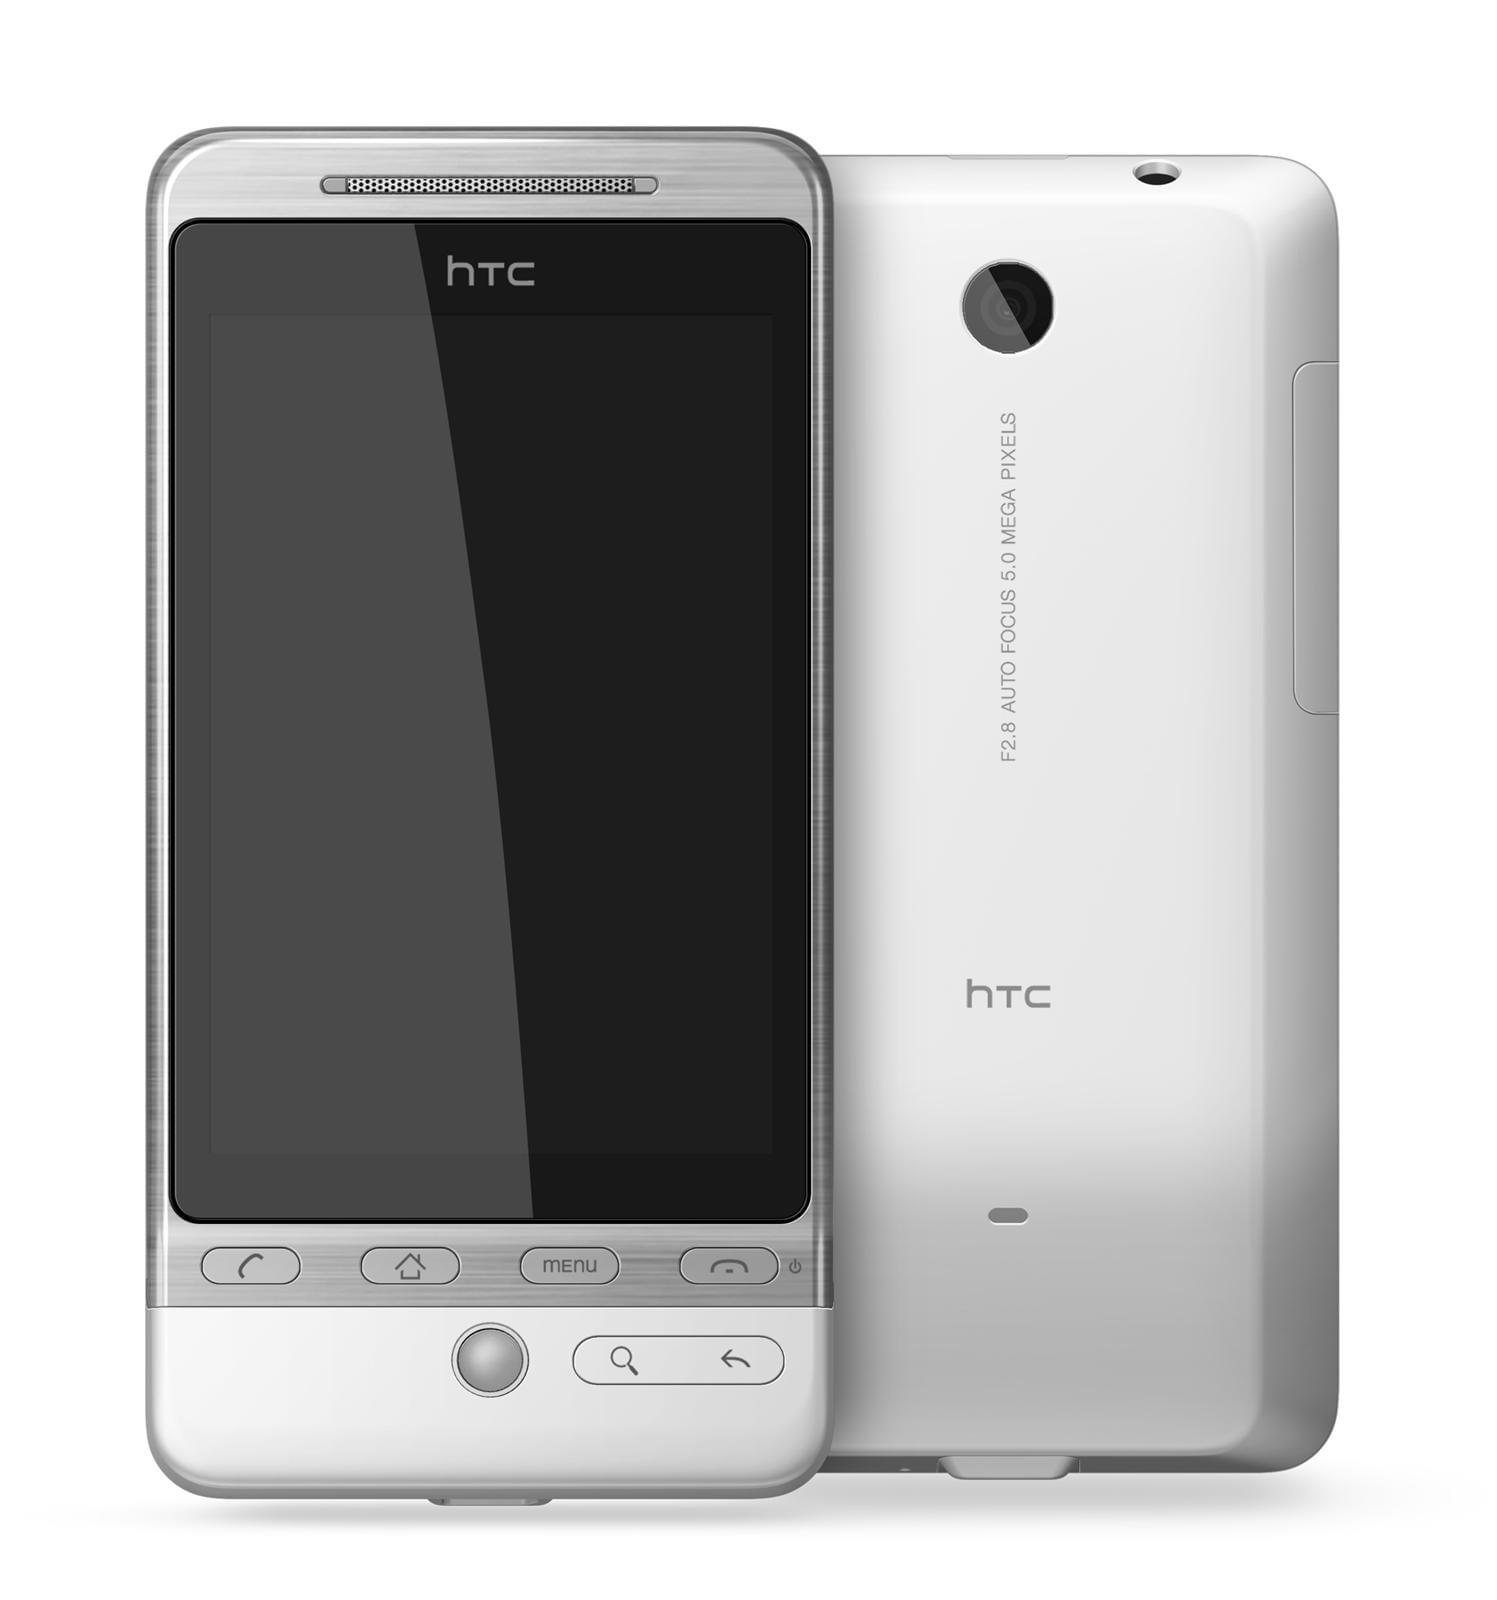 HTC Hero touchscreen phone with built-in trackball